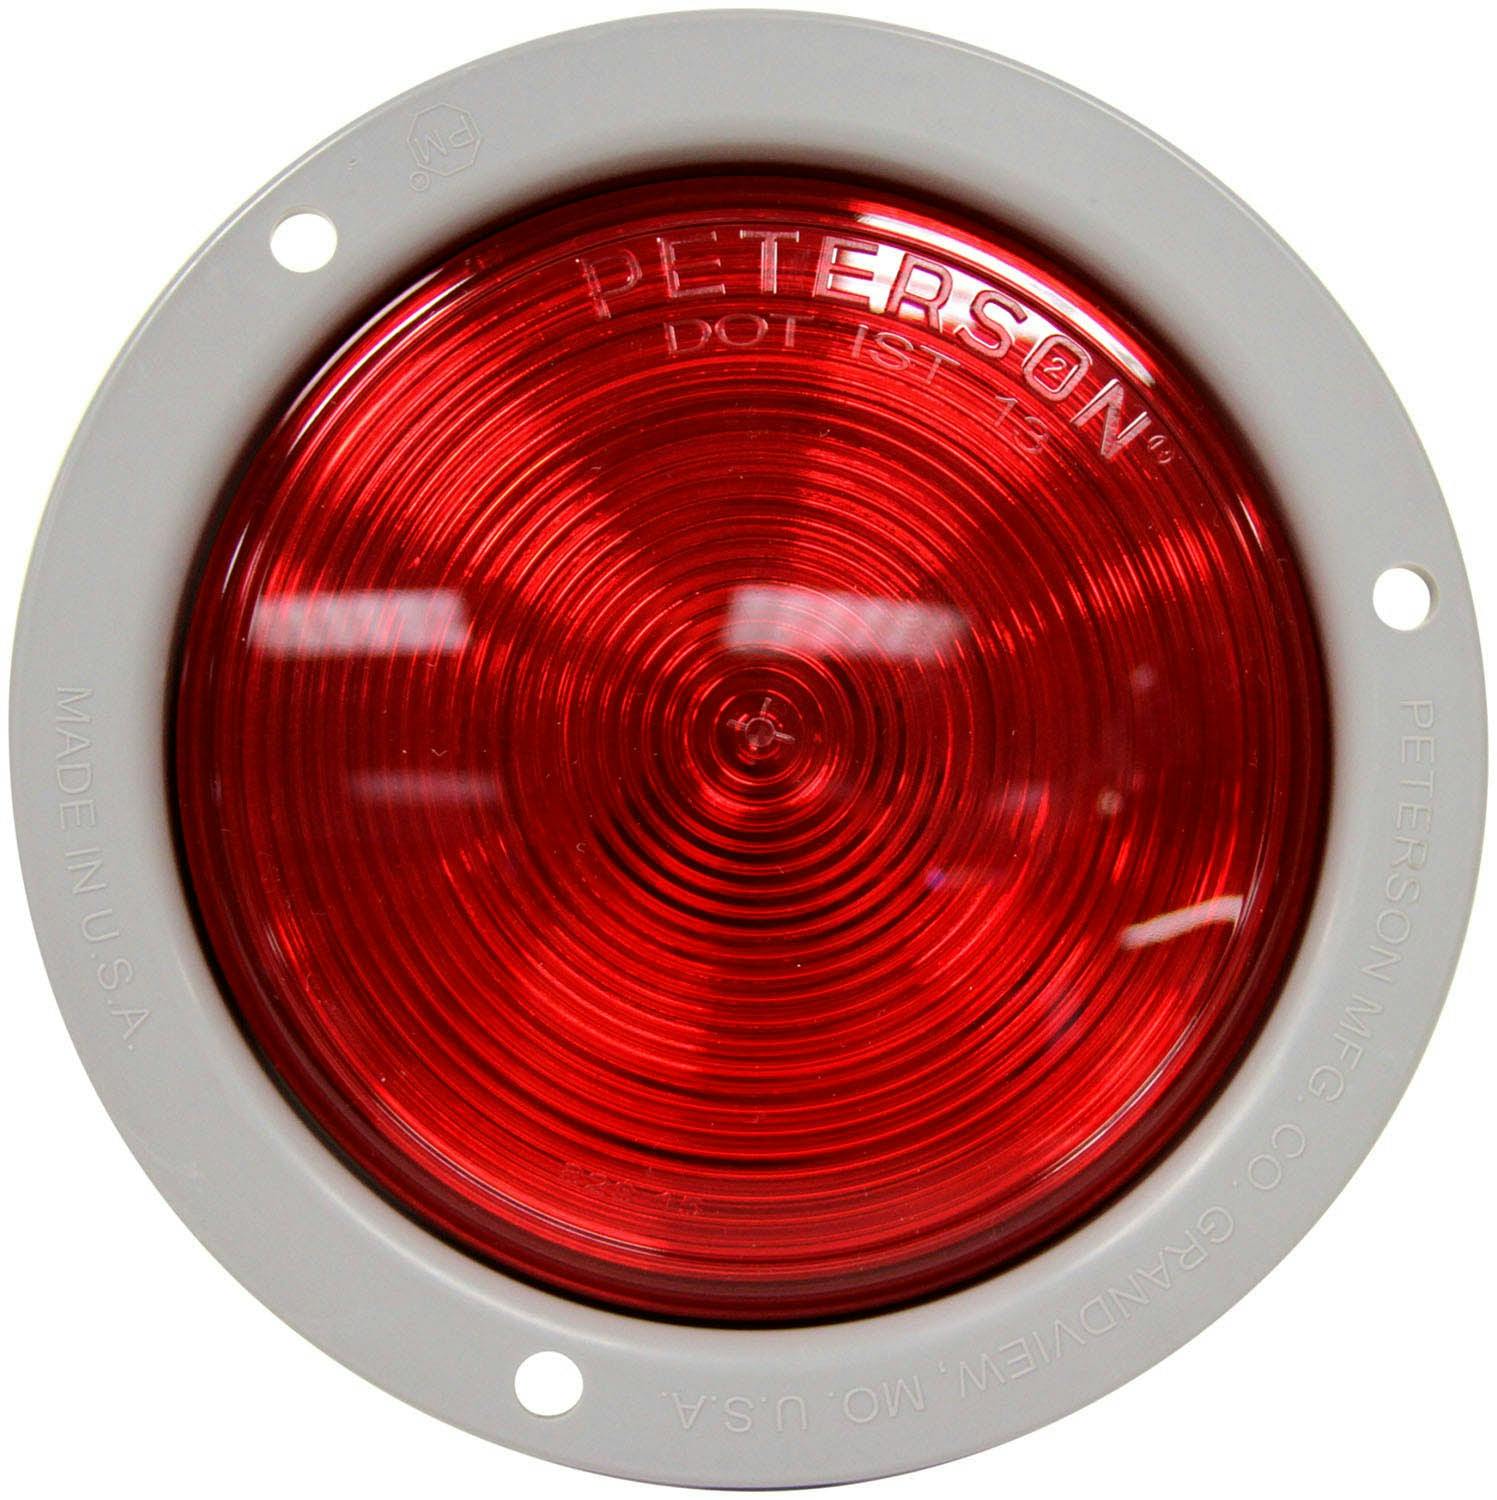 LED Stop/Turn/Tail, Round, Single Diode, Flange-Mount 4", red, bulk pack (Pack of 50)